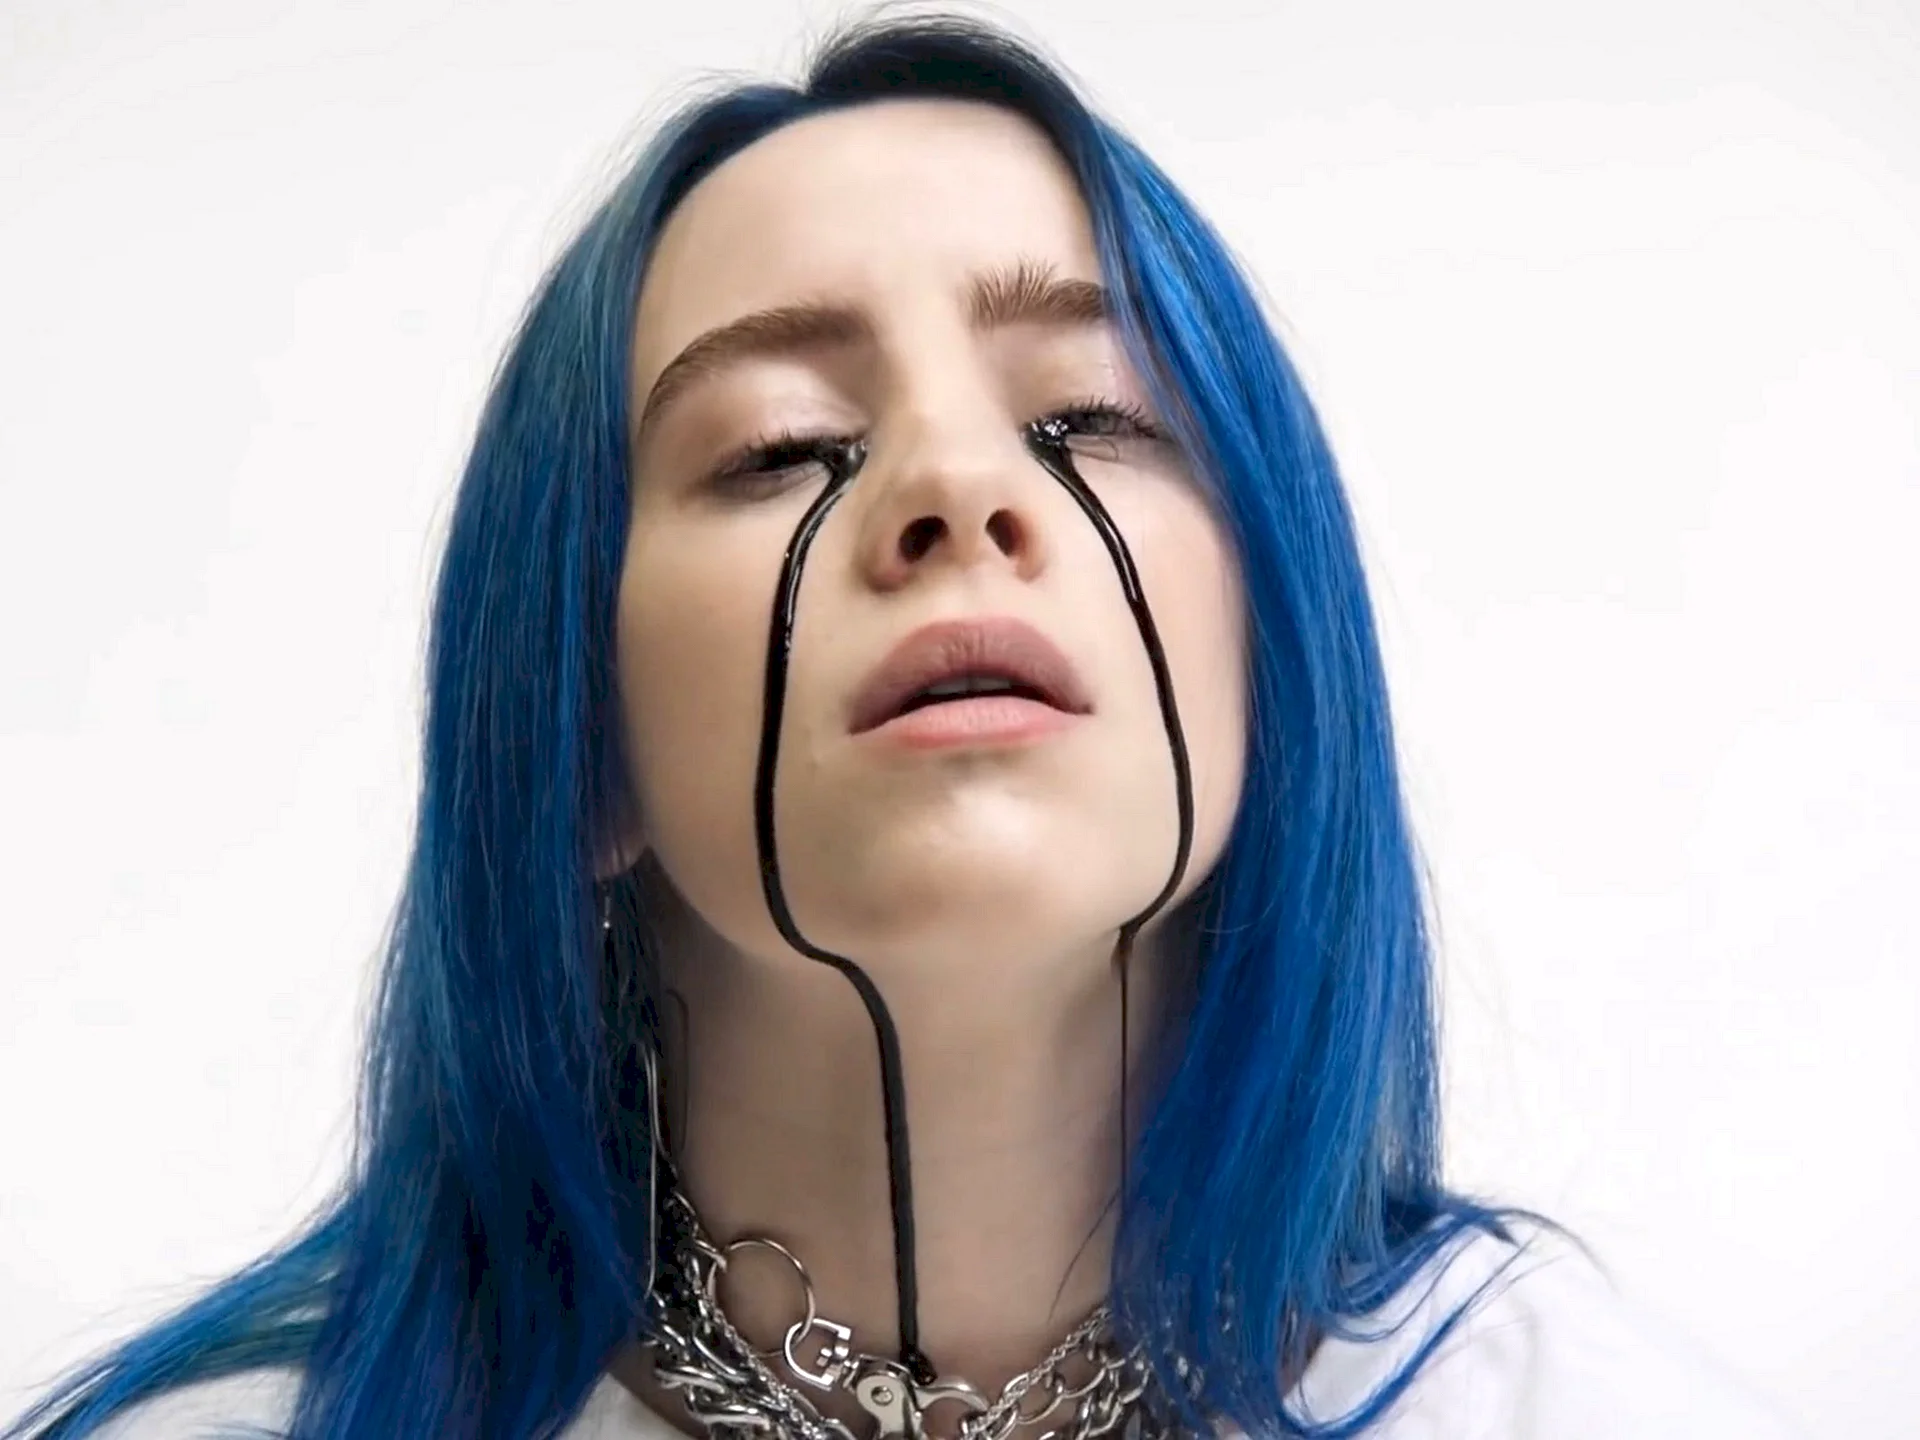 Billie Eilish's blue hair and outfit at the 2019 Coachella Music Festival - wide 8